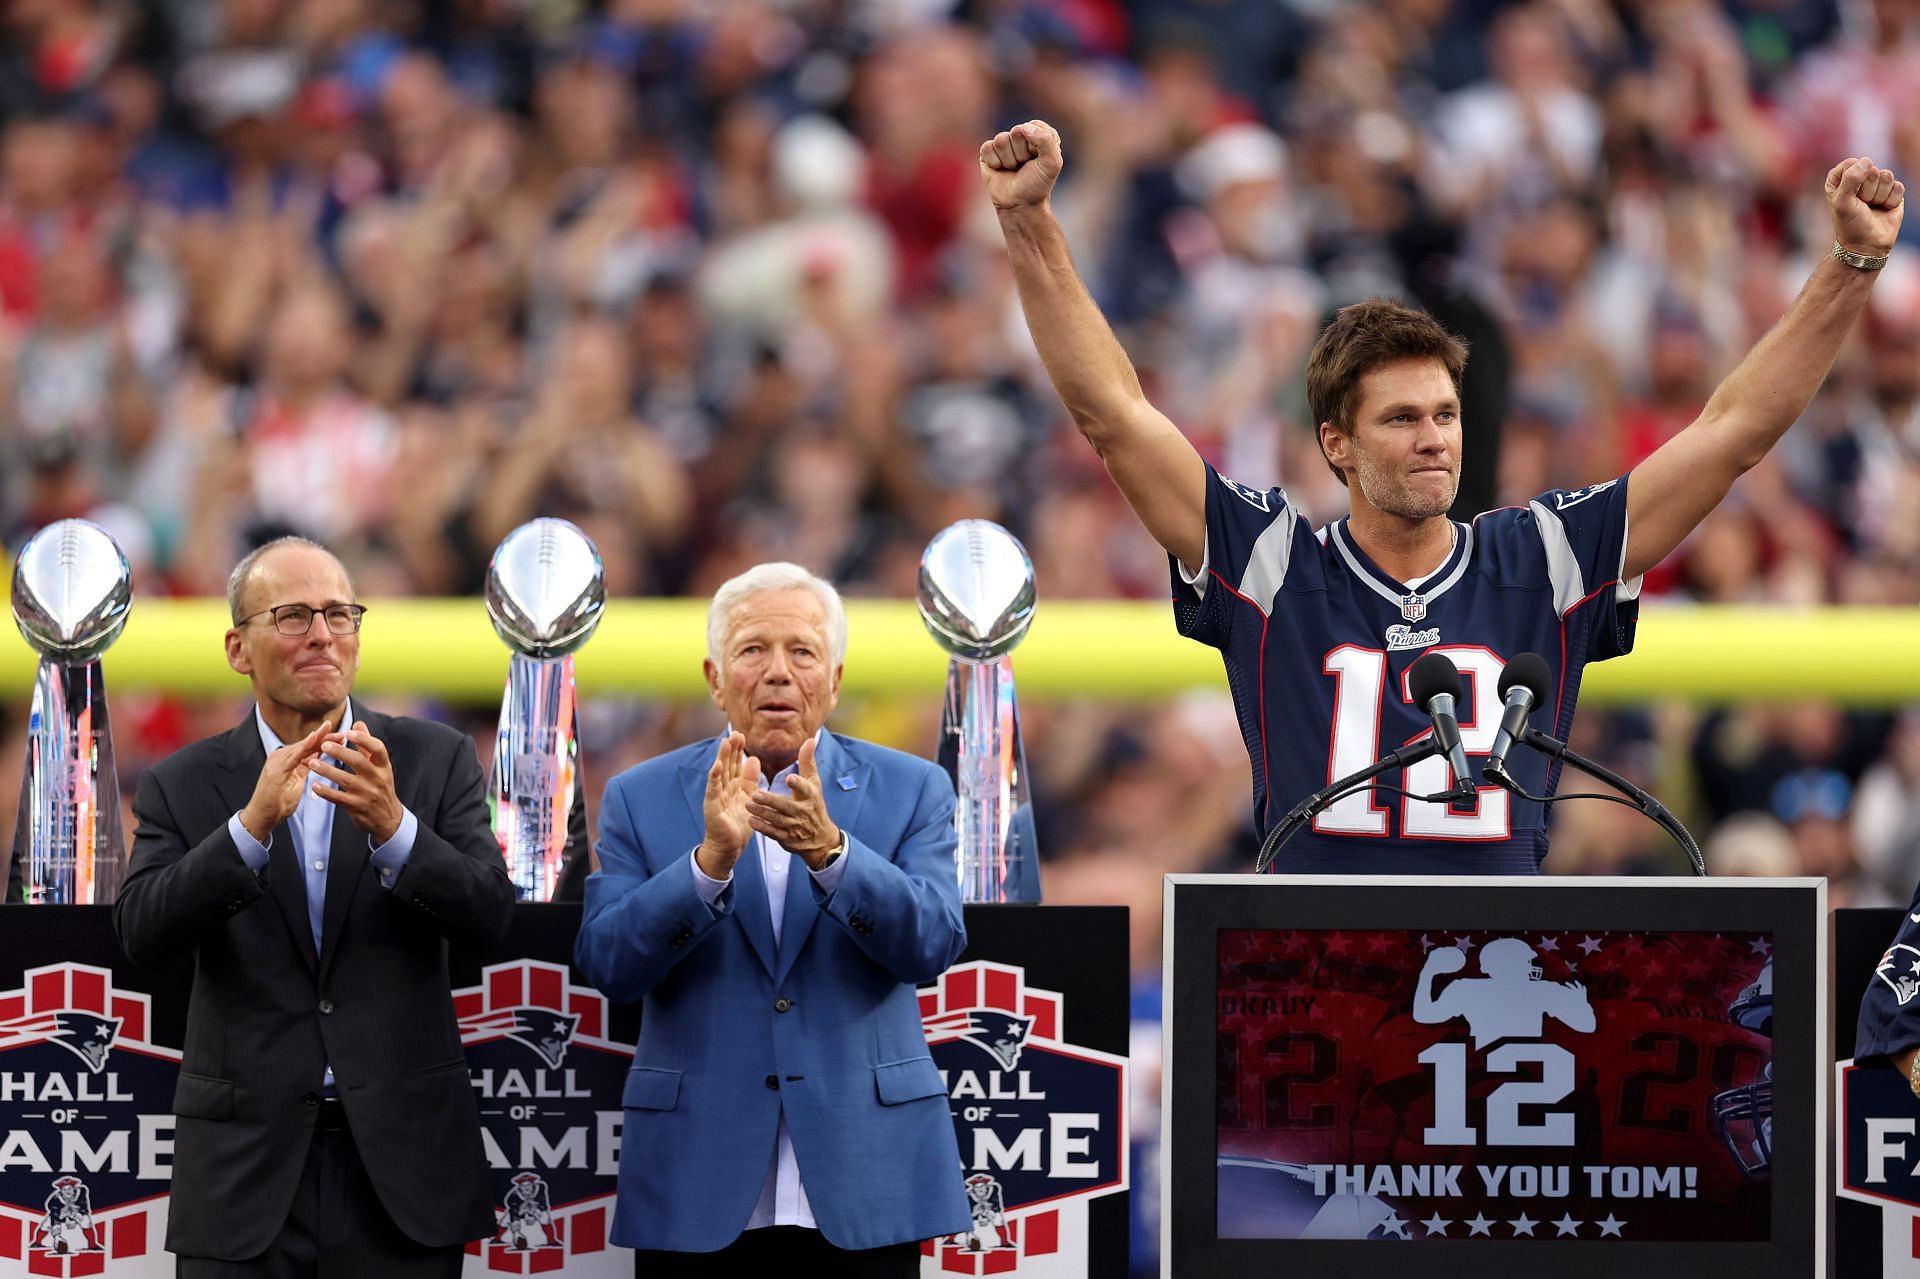 Tom Brady gets inducted into the Patriots Hall of Fame